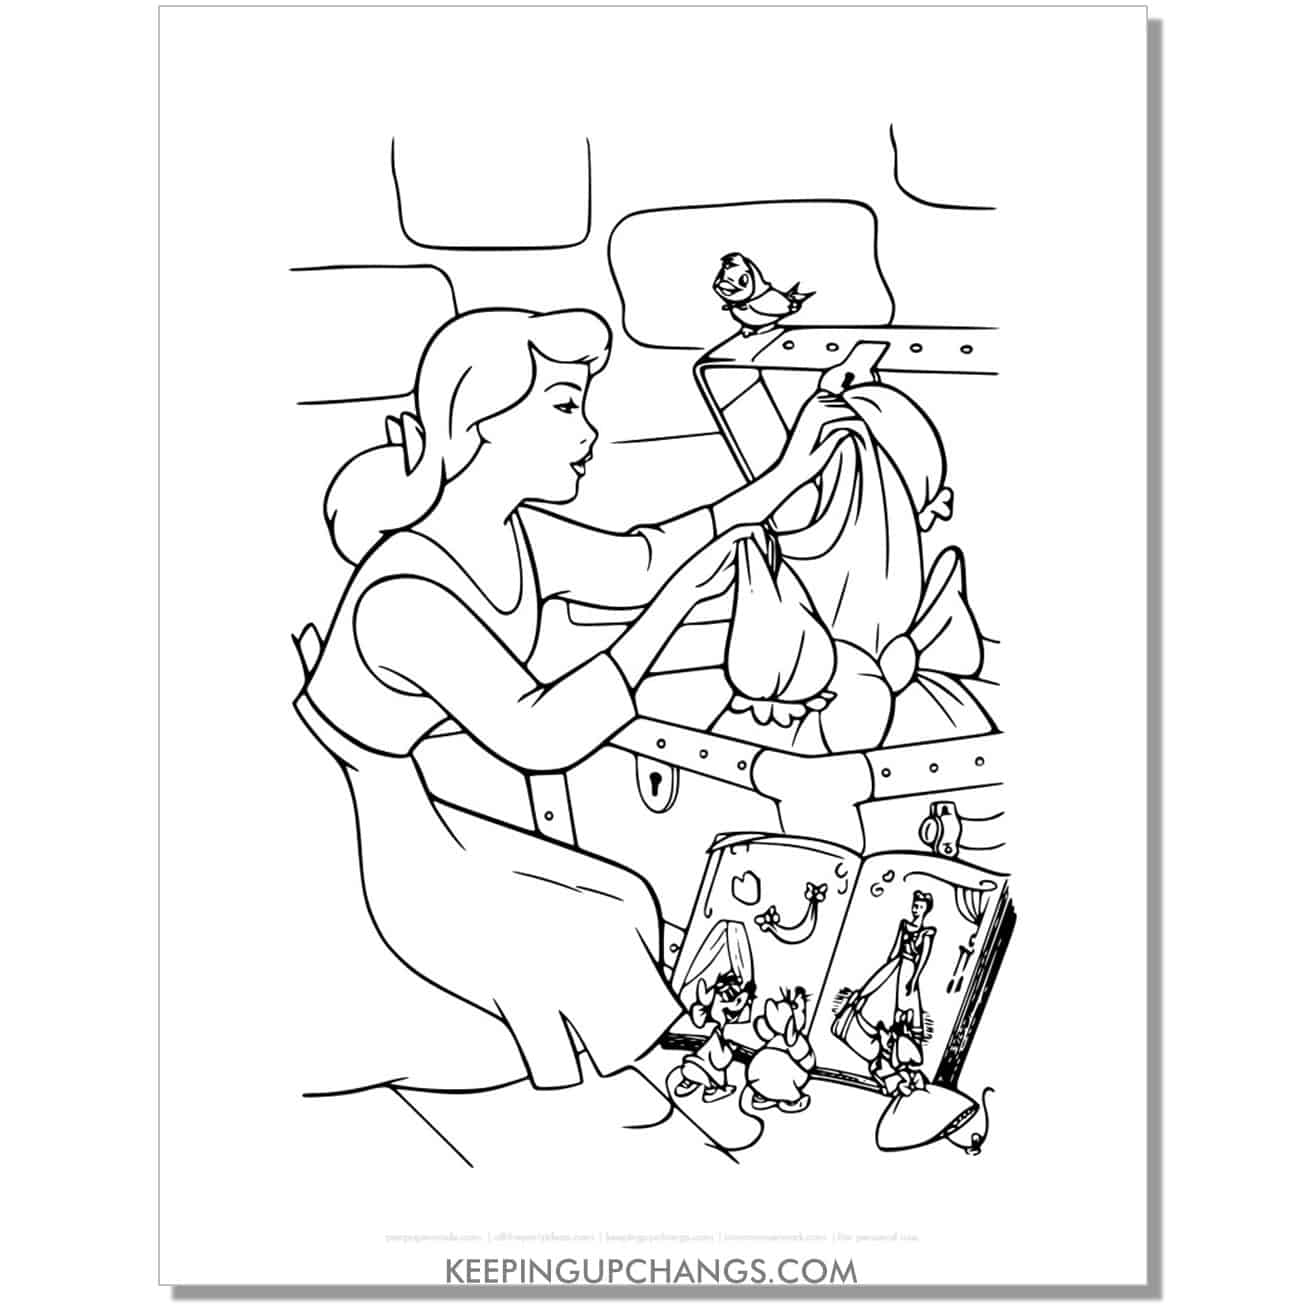 cinderella looking for dress in old chest coloring page, sheet.